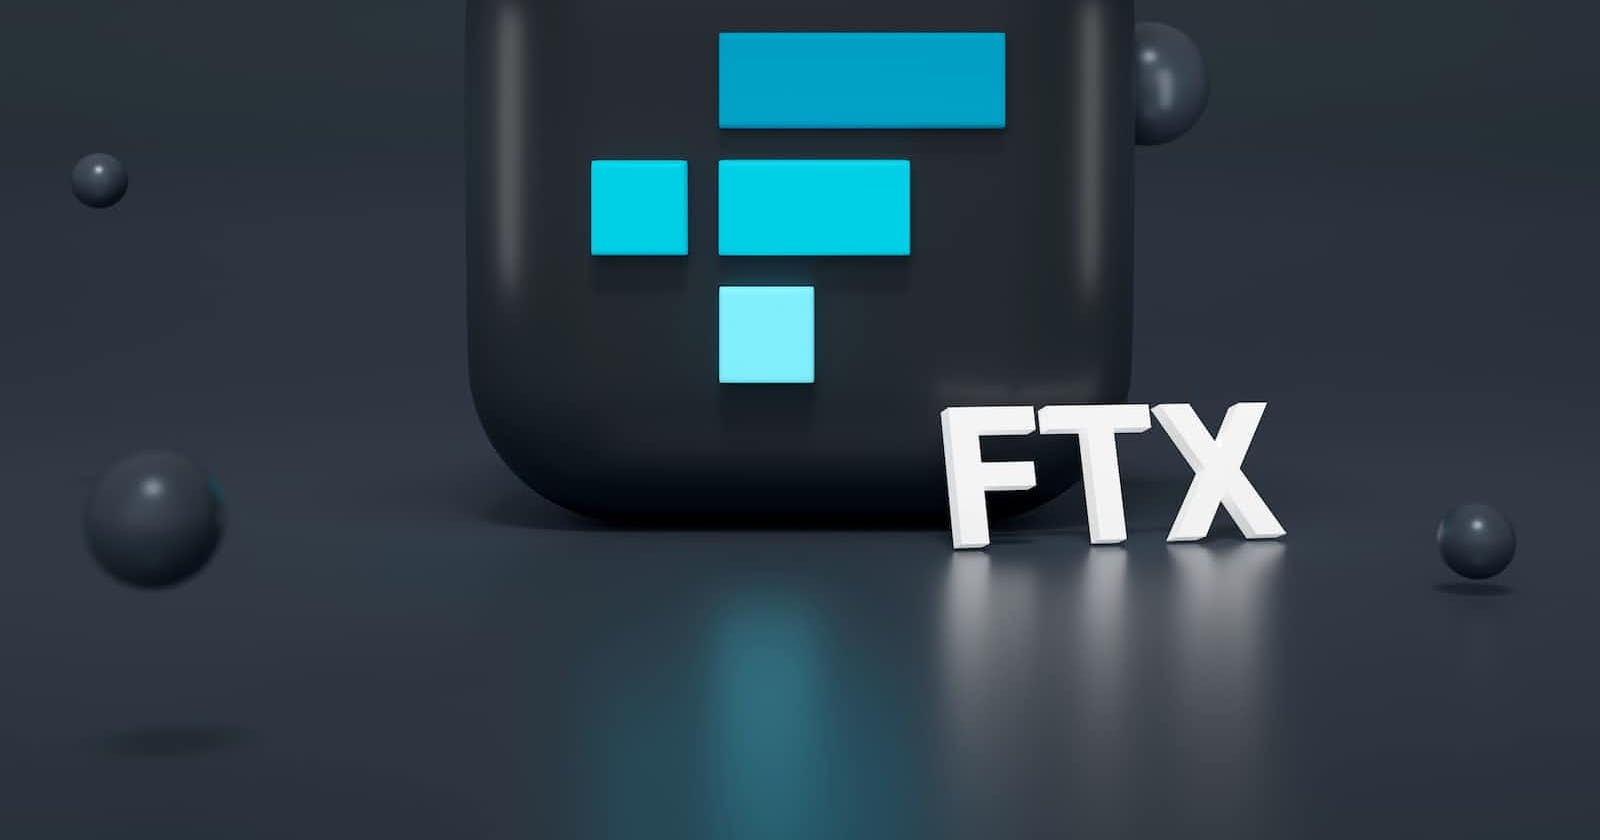 What Can We Learn From the Fall of FTX? Detailed Information About Everything You Need To Know About FTX's Downfall.